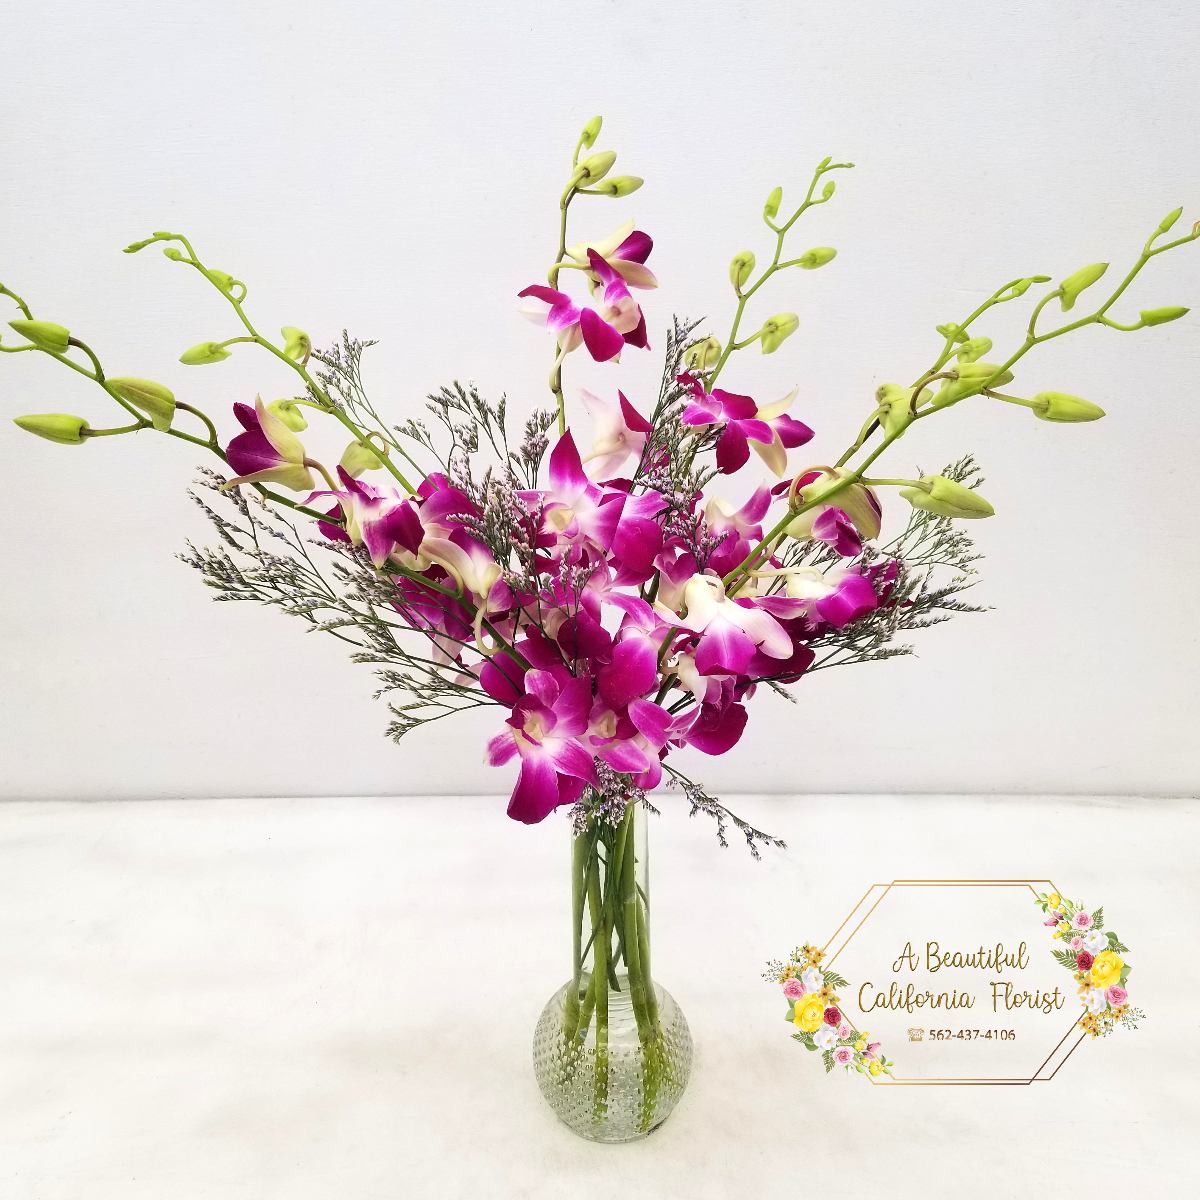 Orchid Symphony - Beautiful dendrobium orchids spill out in a symphony of lavender hues. Accented flowers are the finishing touch. Orchid Symphony from Long Beach favorite flower shop, A Beautiful California Florist, we deliver. Order today!